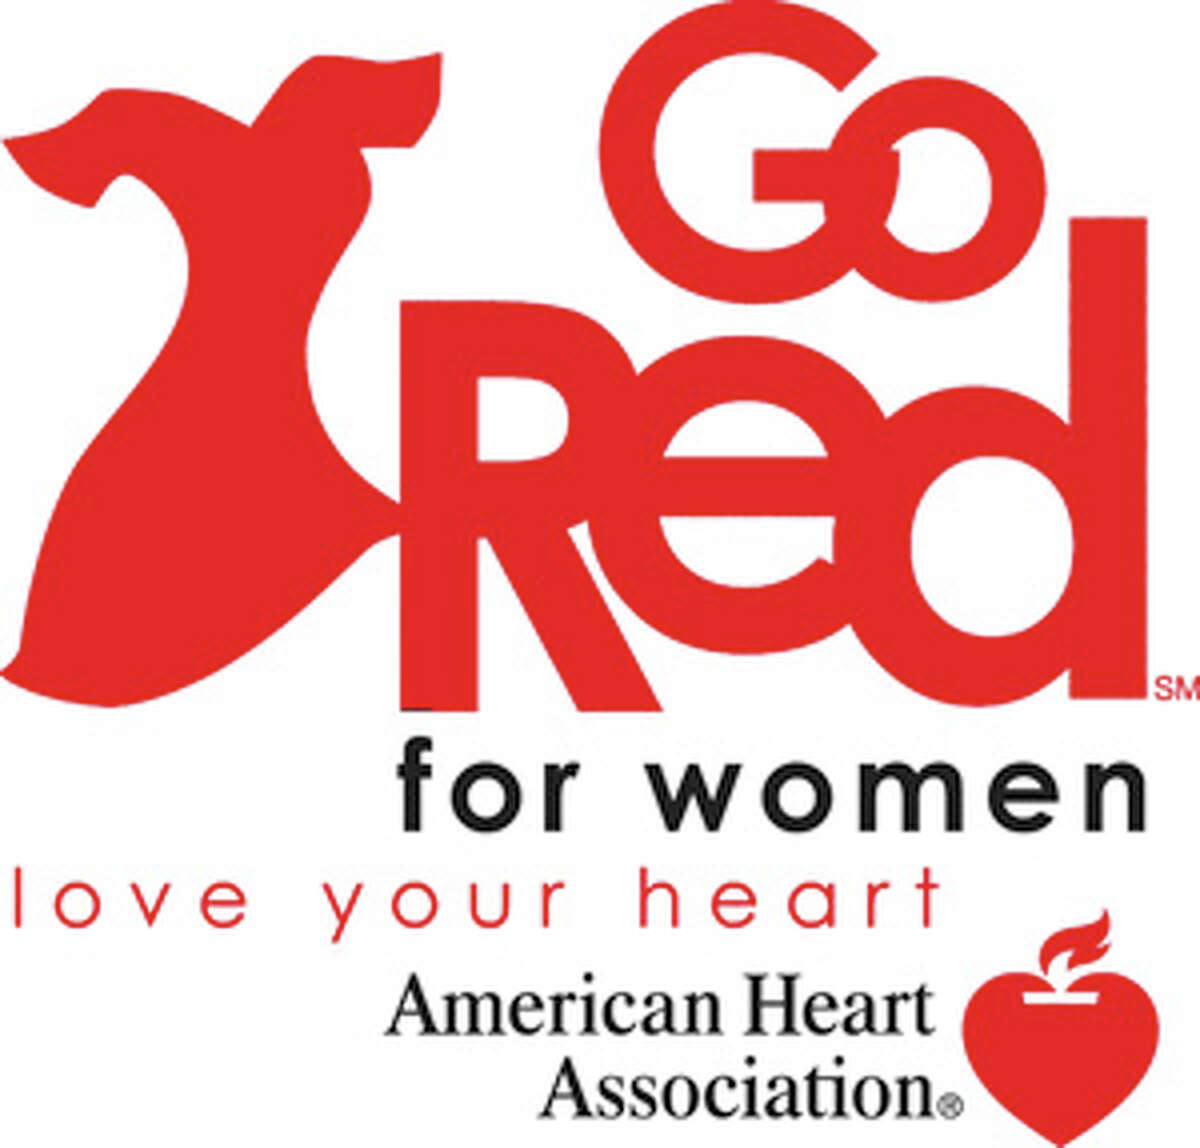 National Wear Red Day is Feb. 1